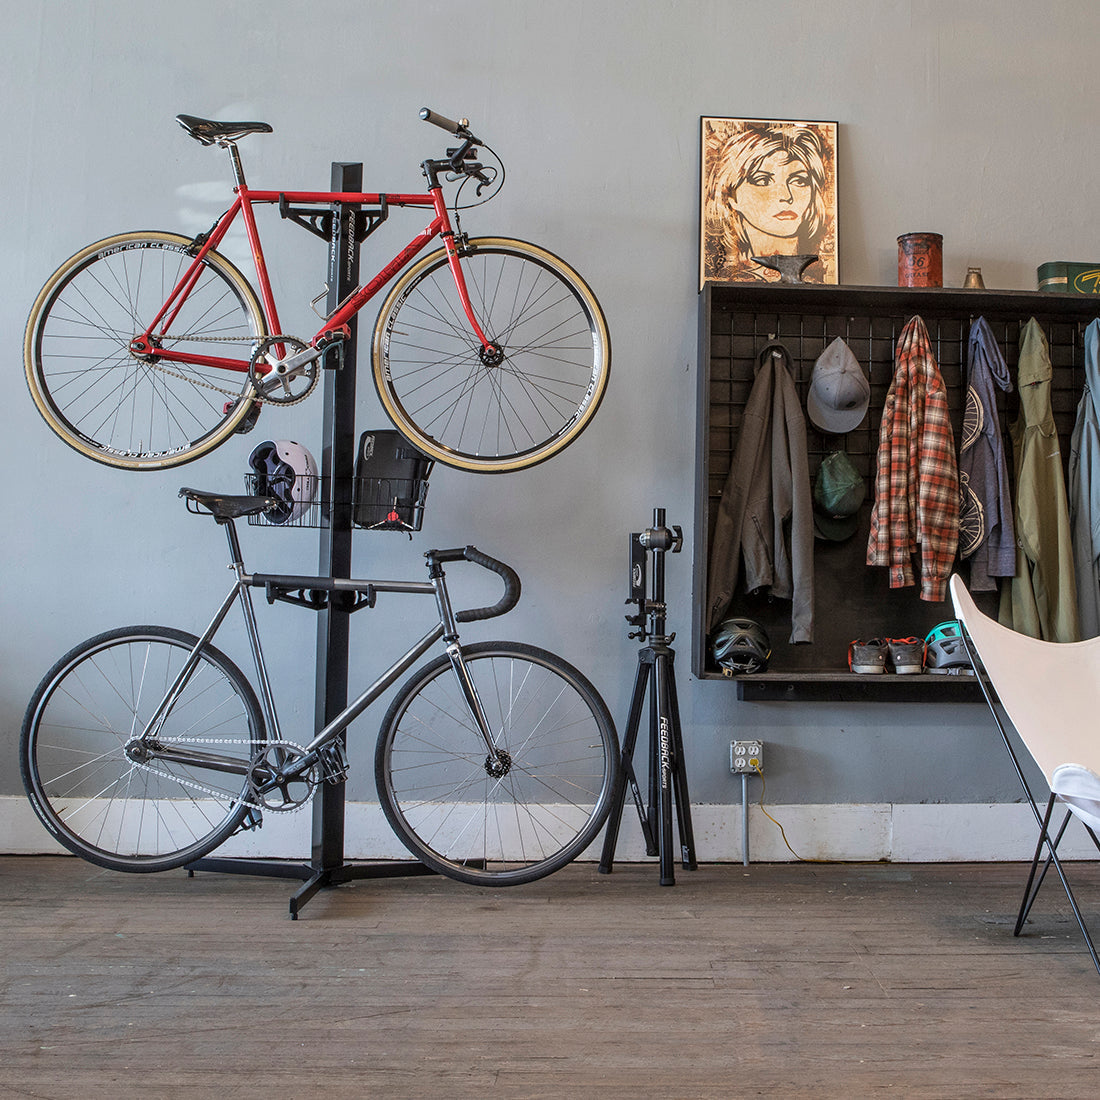 Vertical bike storage tower with 2 bikes in use in a small apartment.